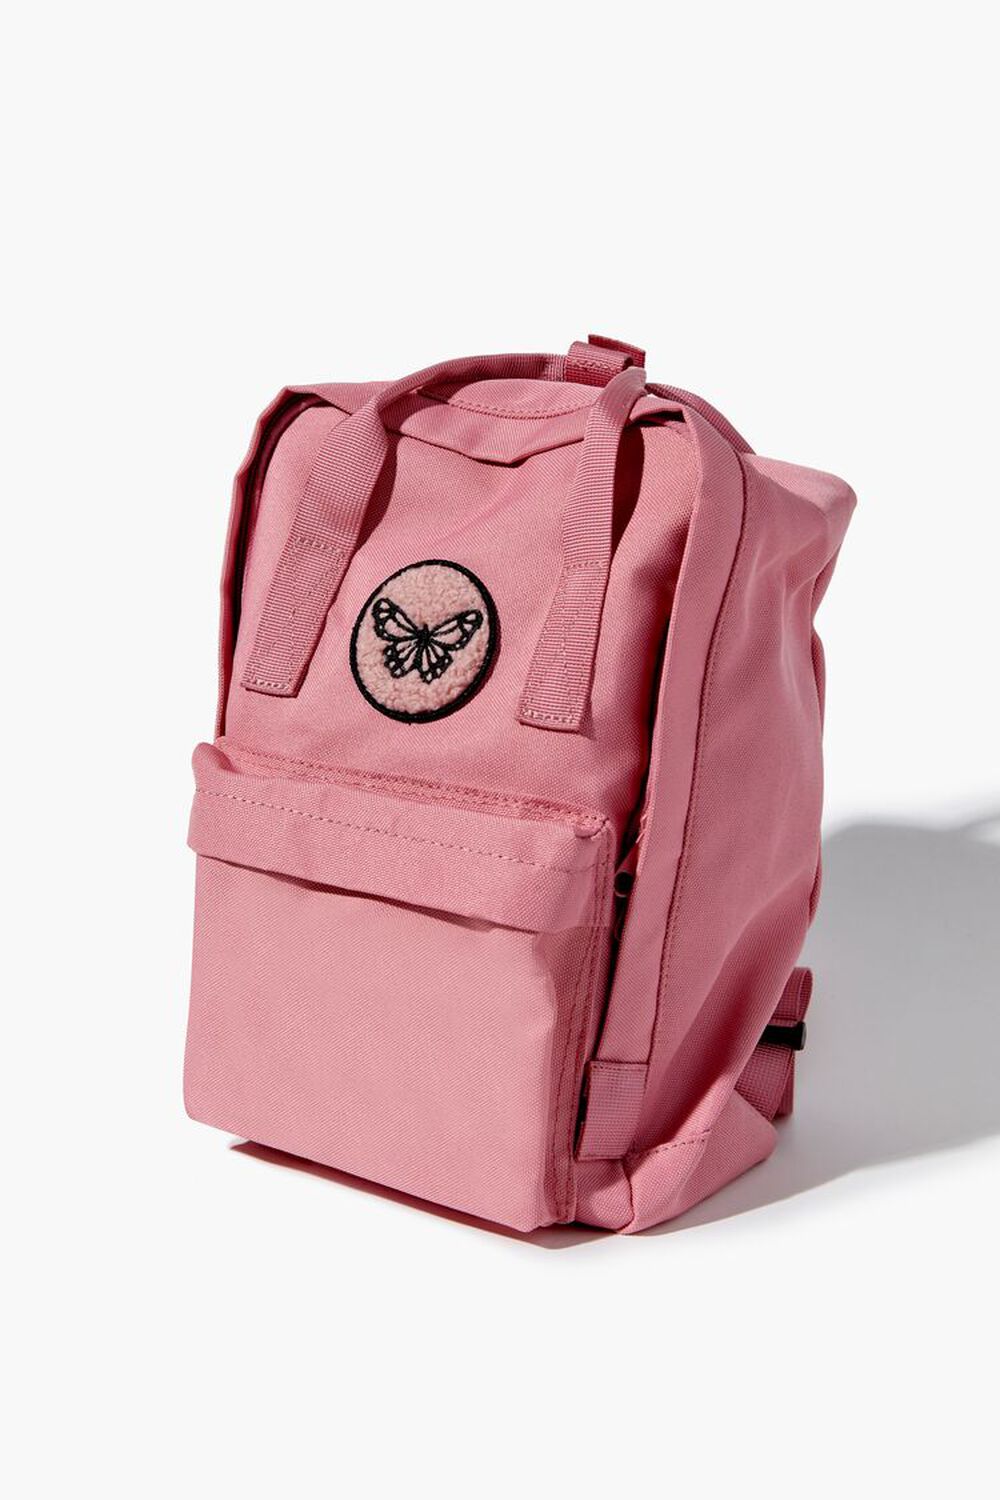 Kids Patch Backpack (Girls), image 1